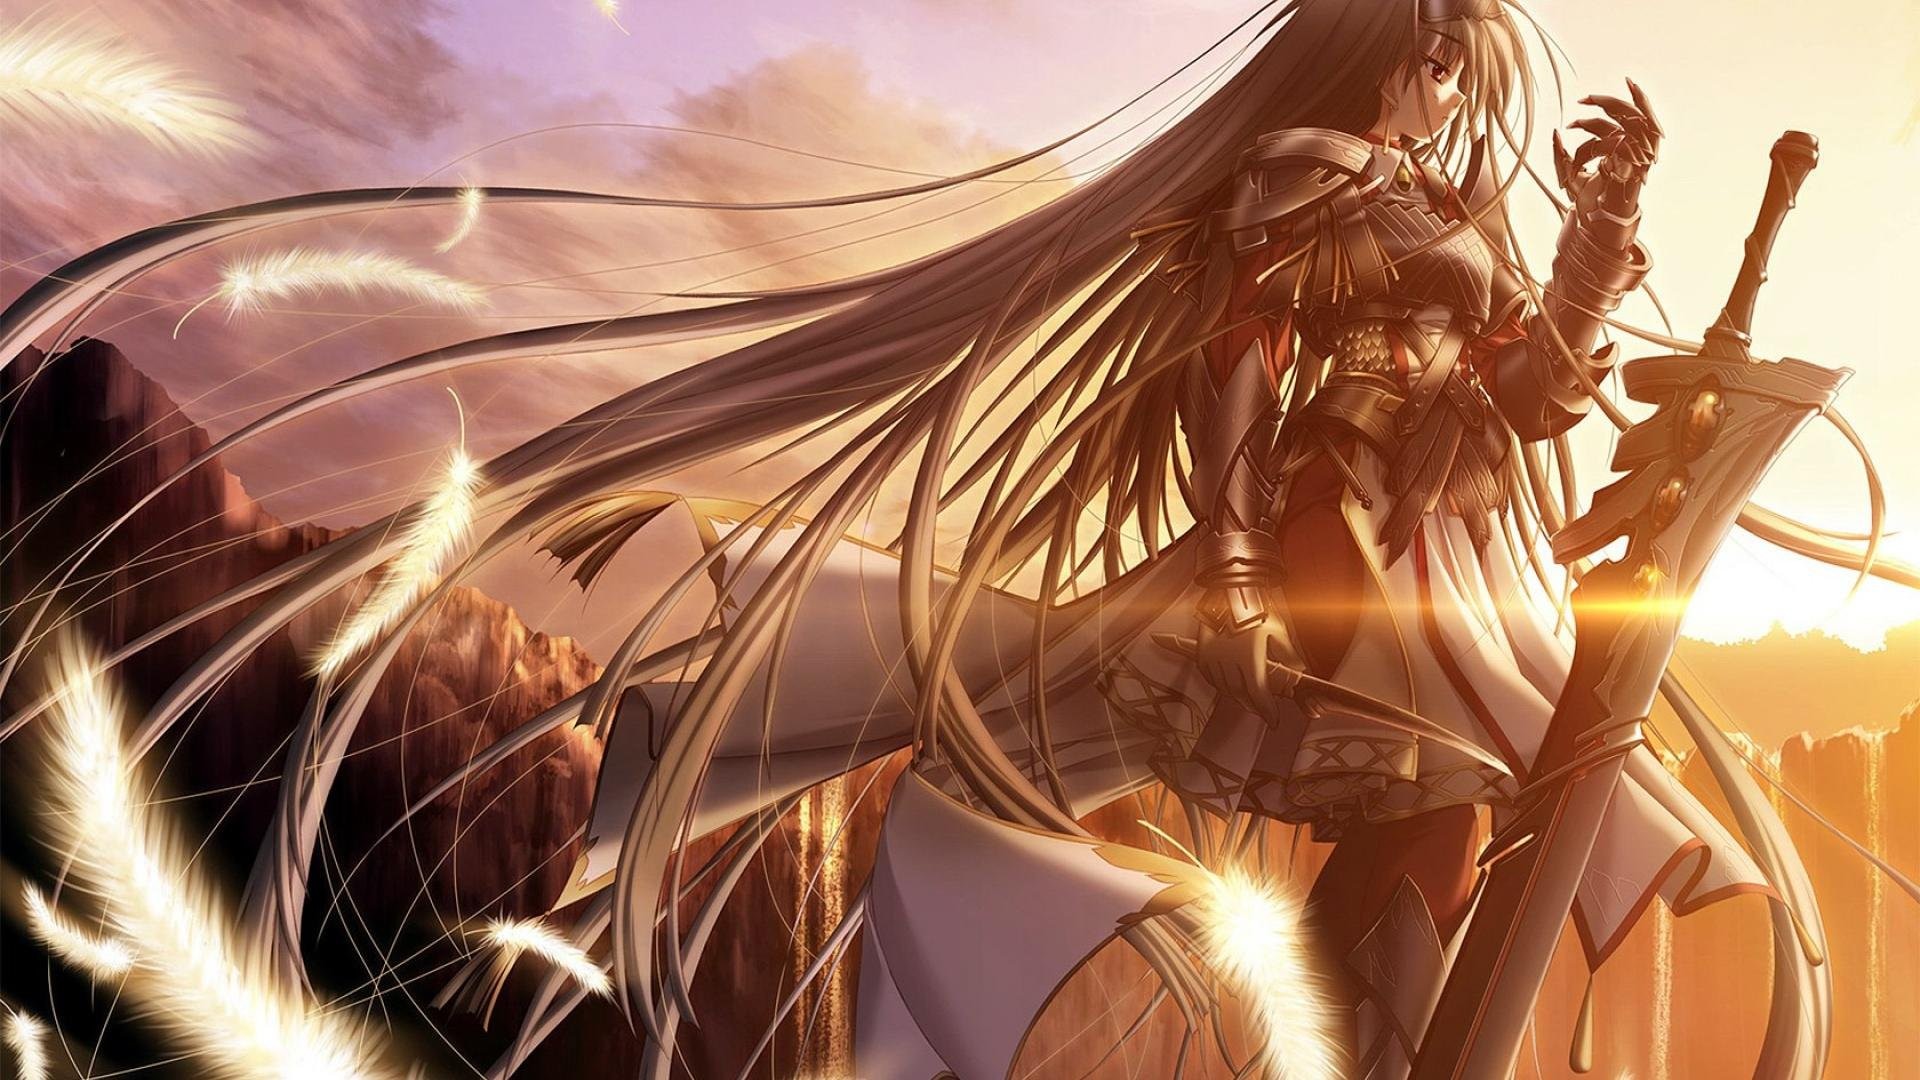 Anime Wallpaper 1360 X 768 70 Images